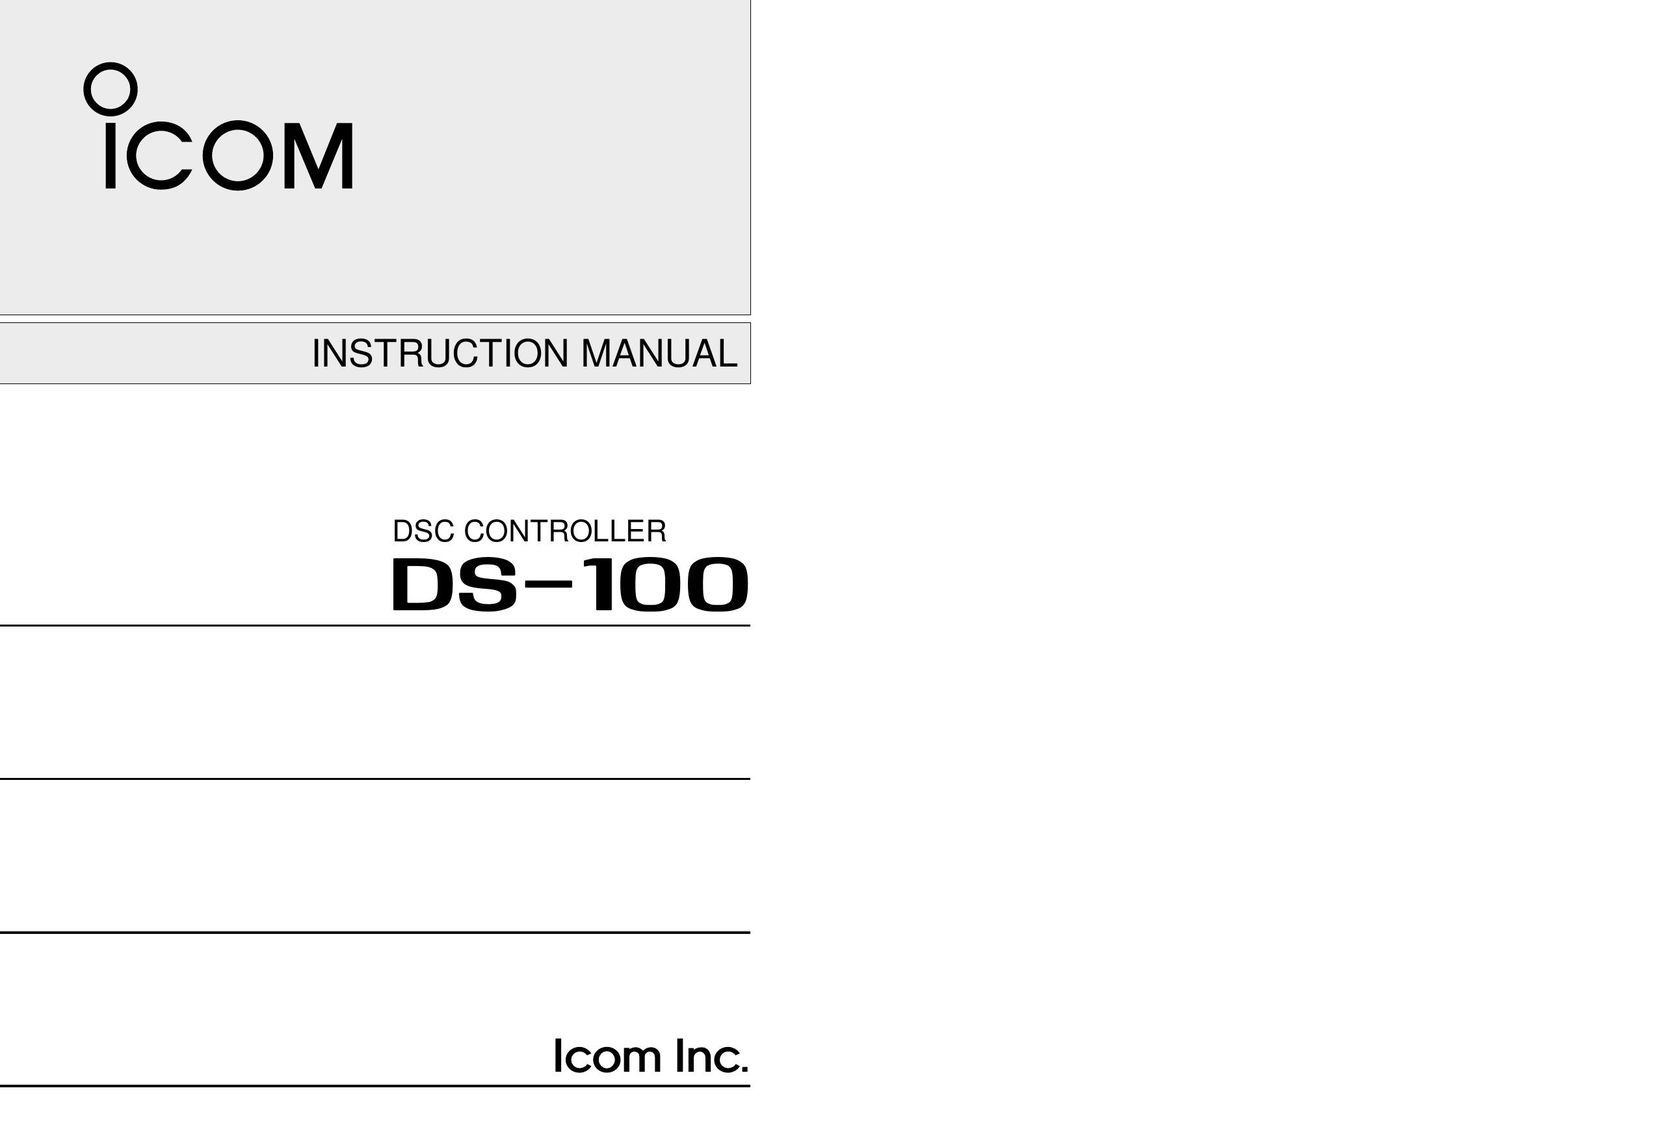 Icom DS-100 Network Card User Manual